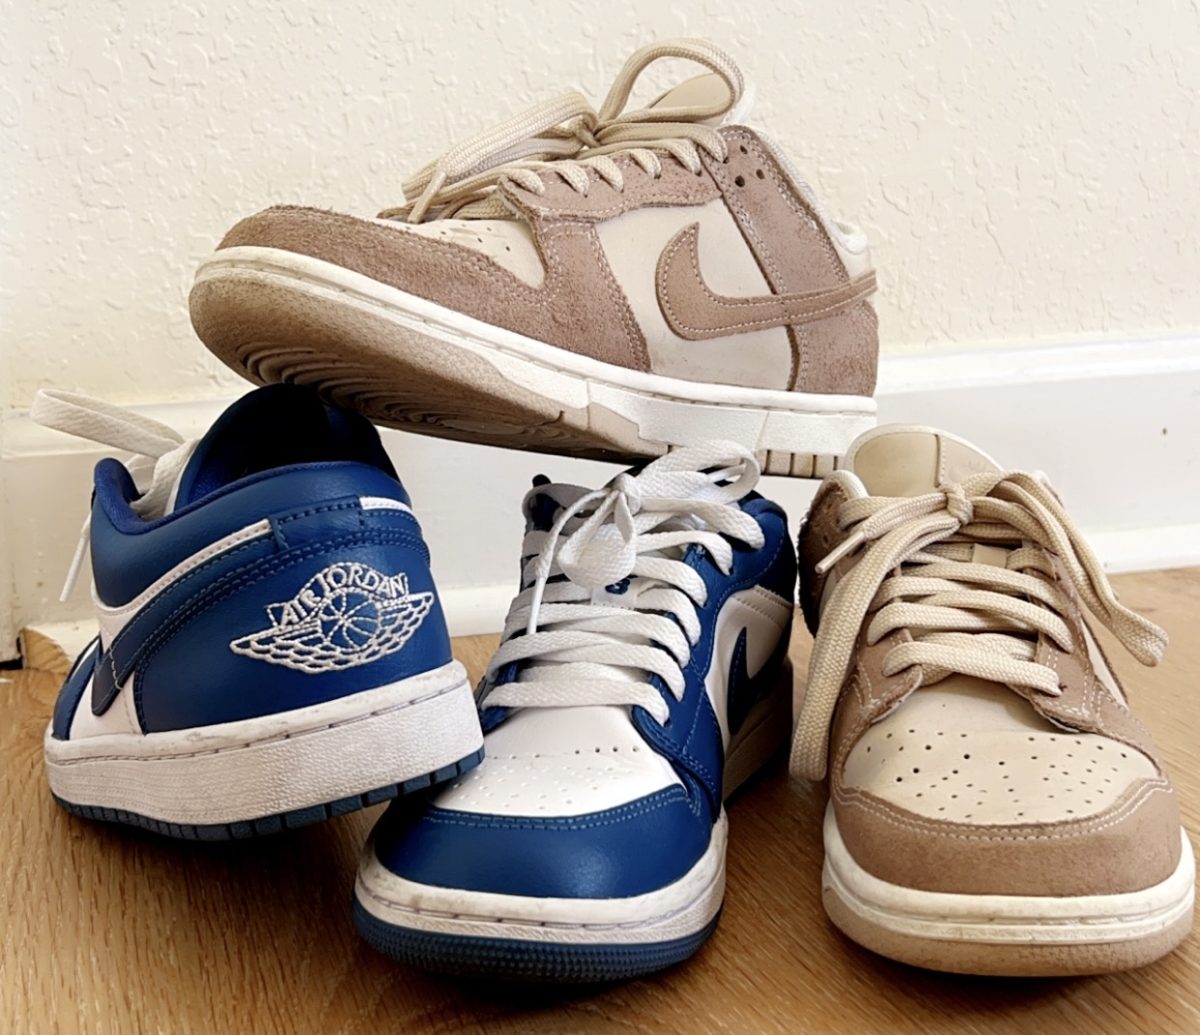 Nike+Dunks+are+an+easy+way+to+add+a+stylish+touch+to+any+outfit.+